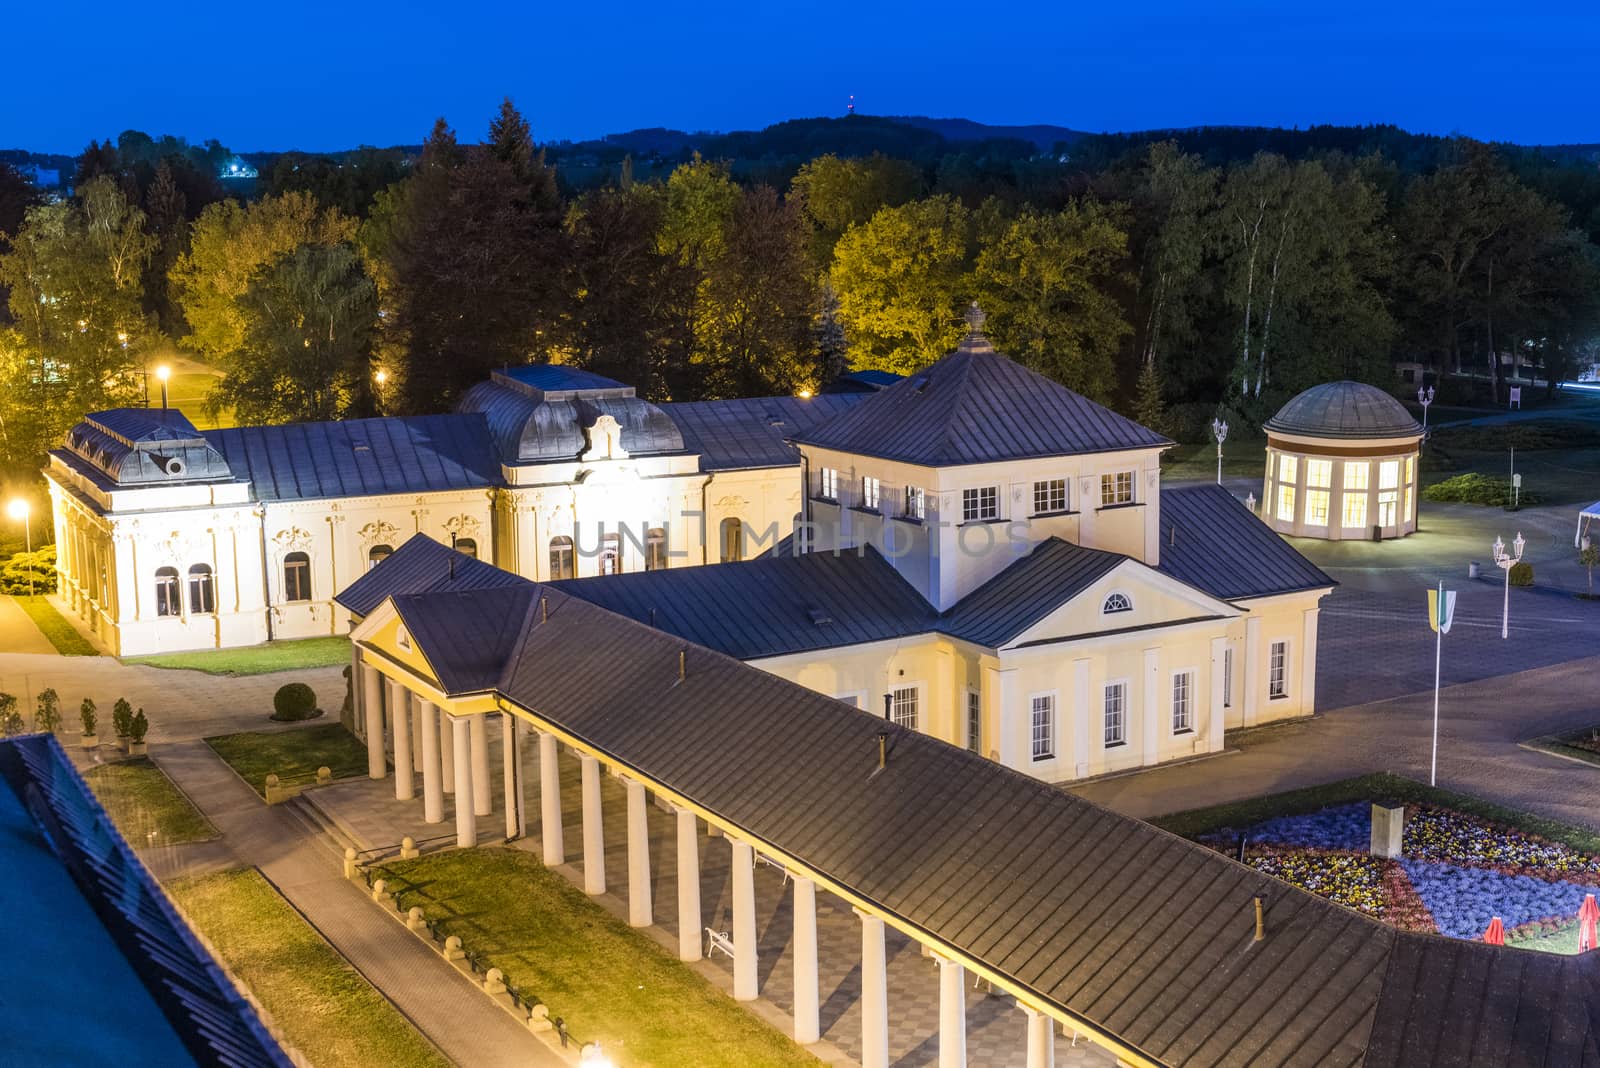 Frantisek Pavilion which houses Frantisek mineral spring and other spa and colonnade buildings from above are the most famous structures in Frantiskovy Lazne Spa town in the North Czech Republic. Seen from above at night